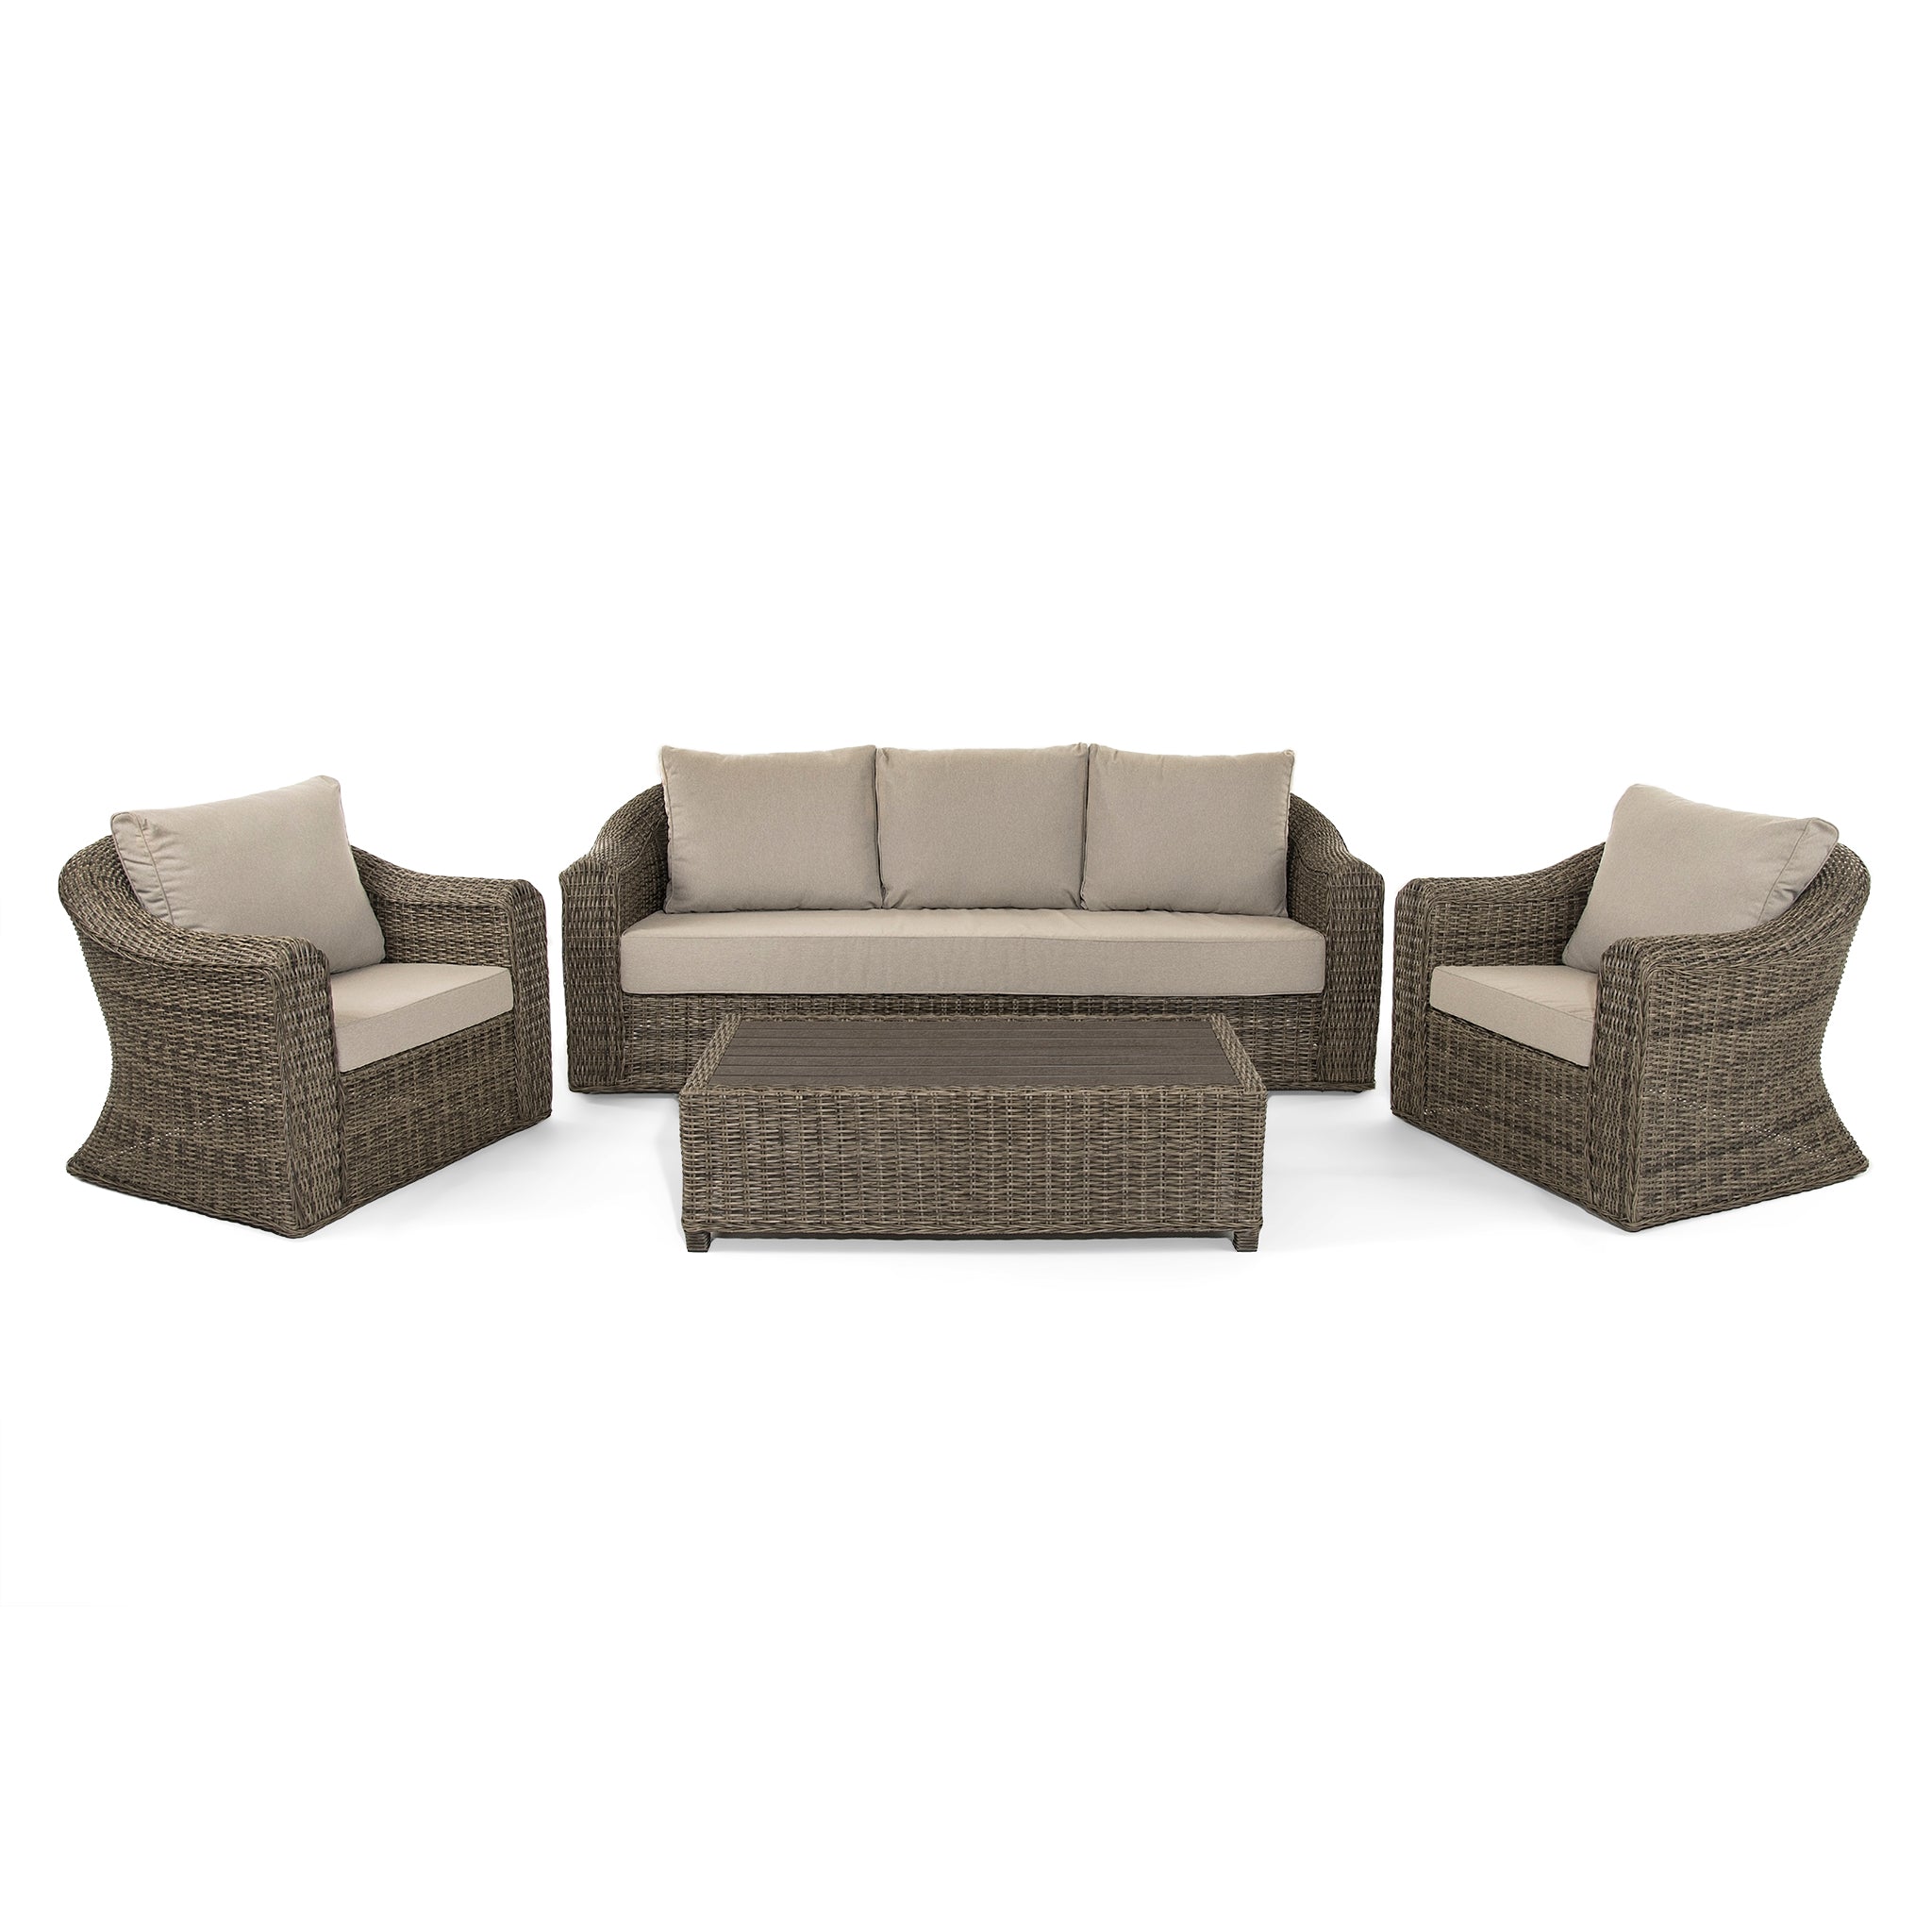 Inde 3 Seater Sofa with 2 Armchairs and Coffee Table in Brown Rattan - Italiancityfurniture